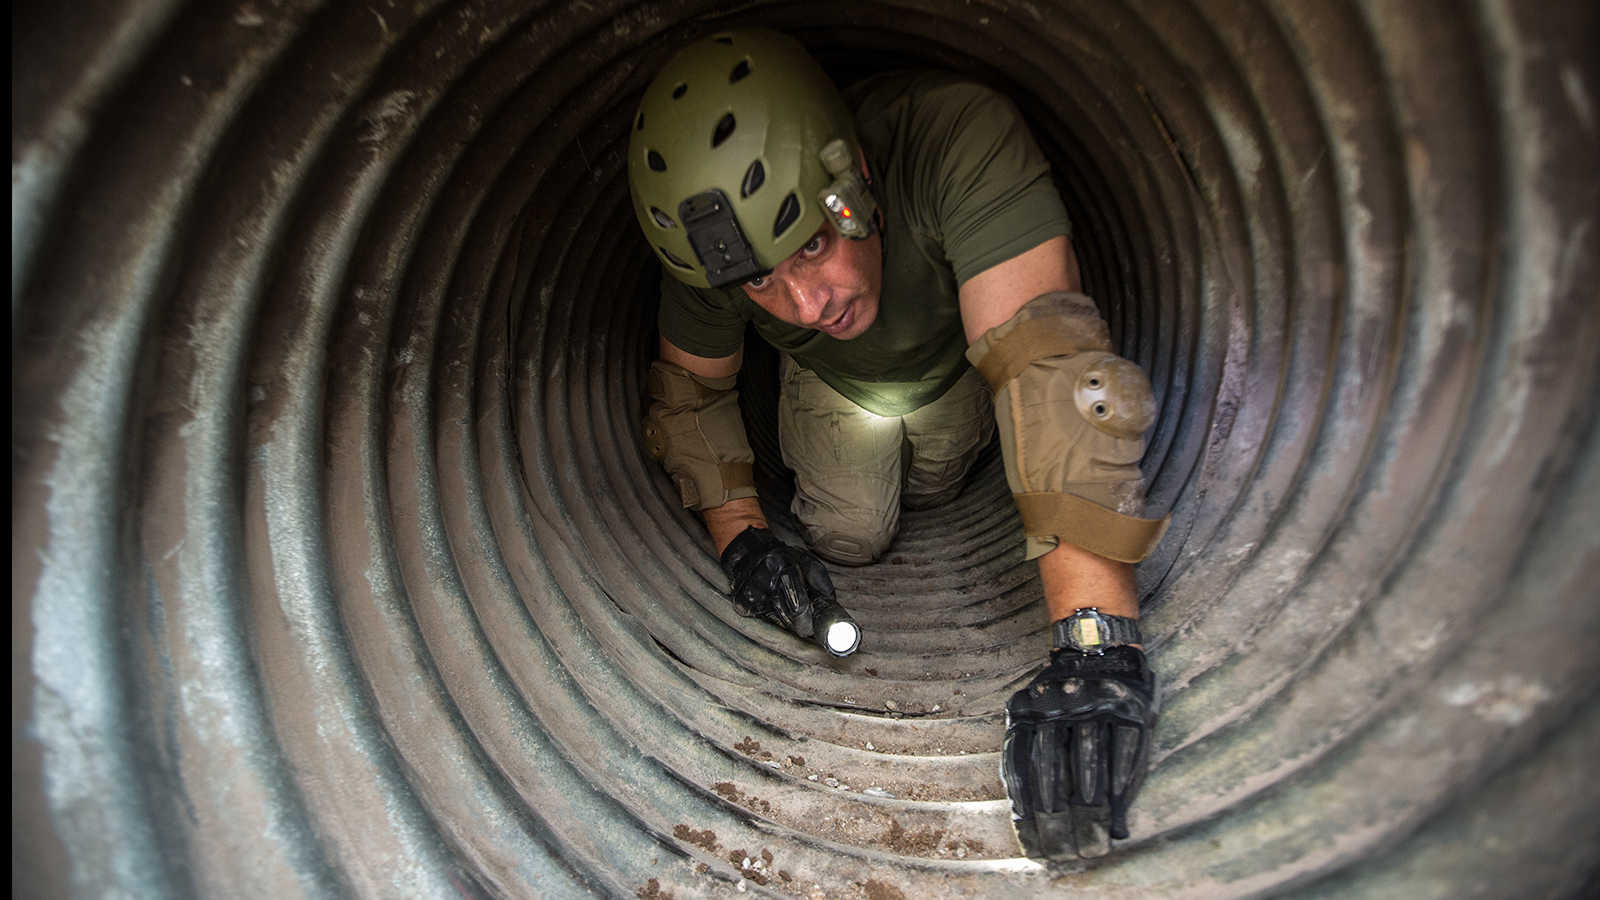 Supervisory Border Patrol Agent Kevin Hecht crawls through the drainage pipe looking for evidence left behind by the illegal tunnelers.